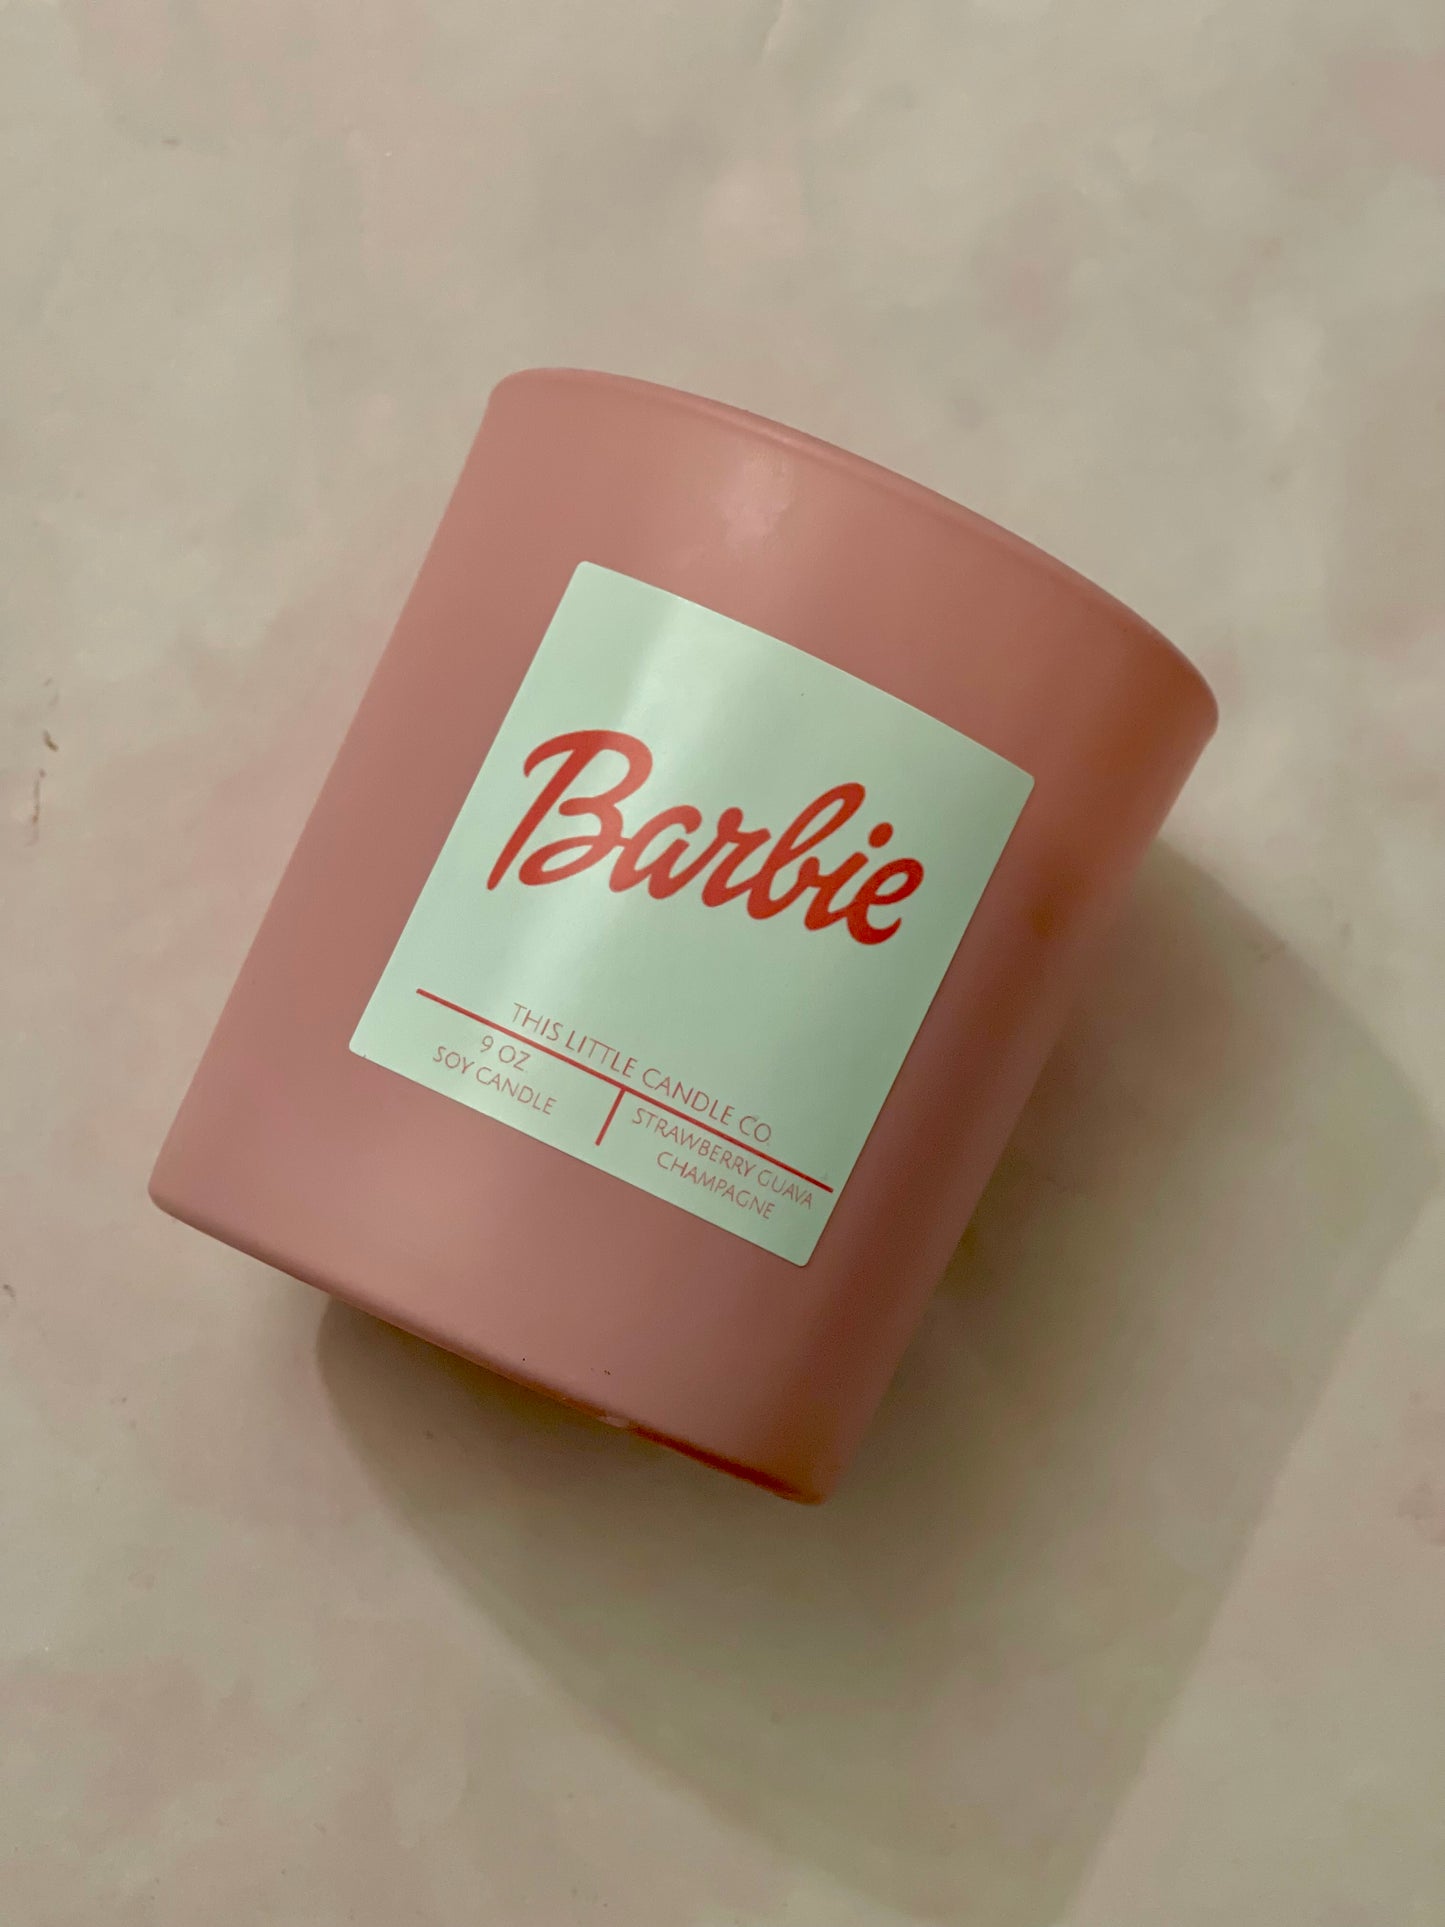 The Barbie Candle